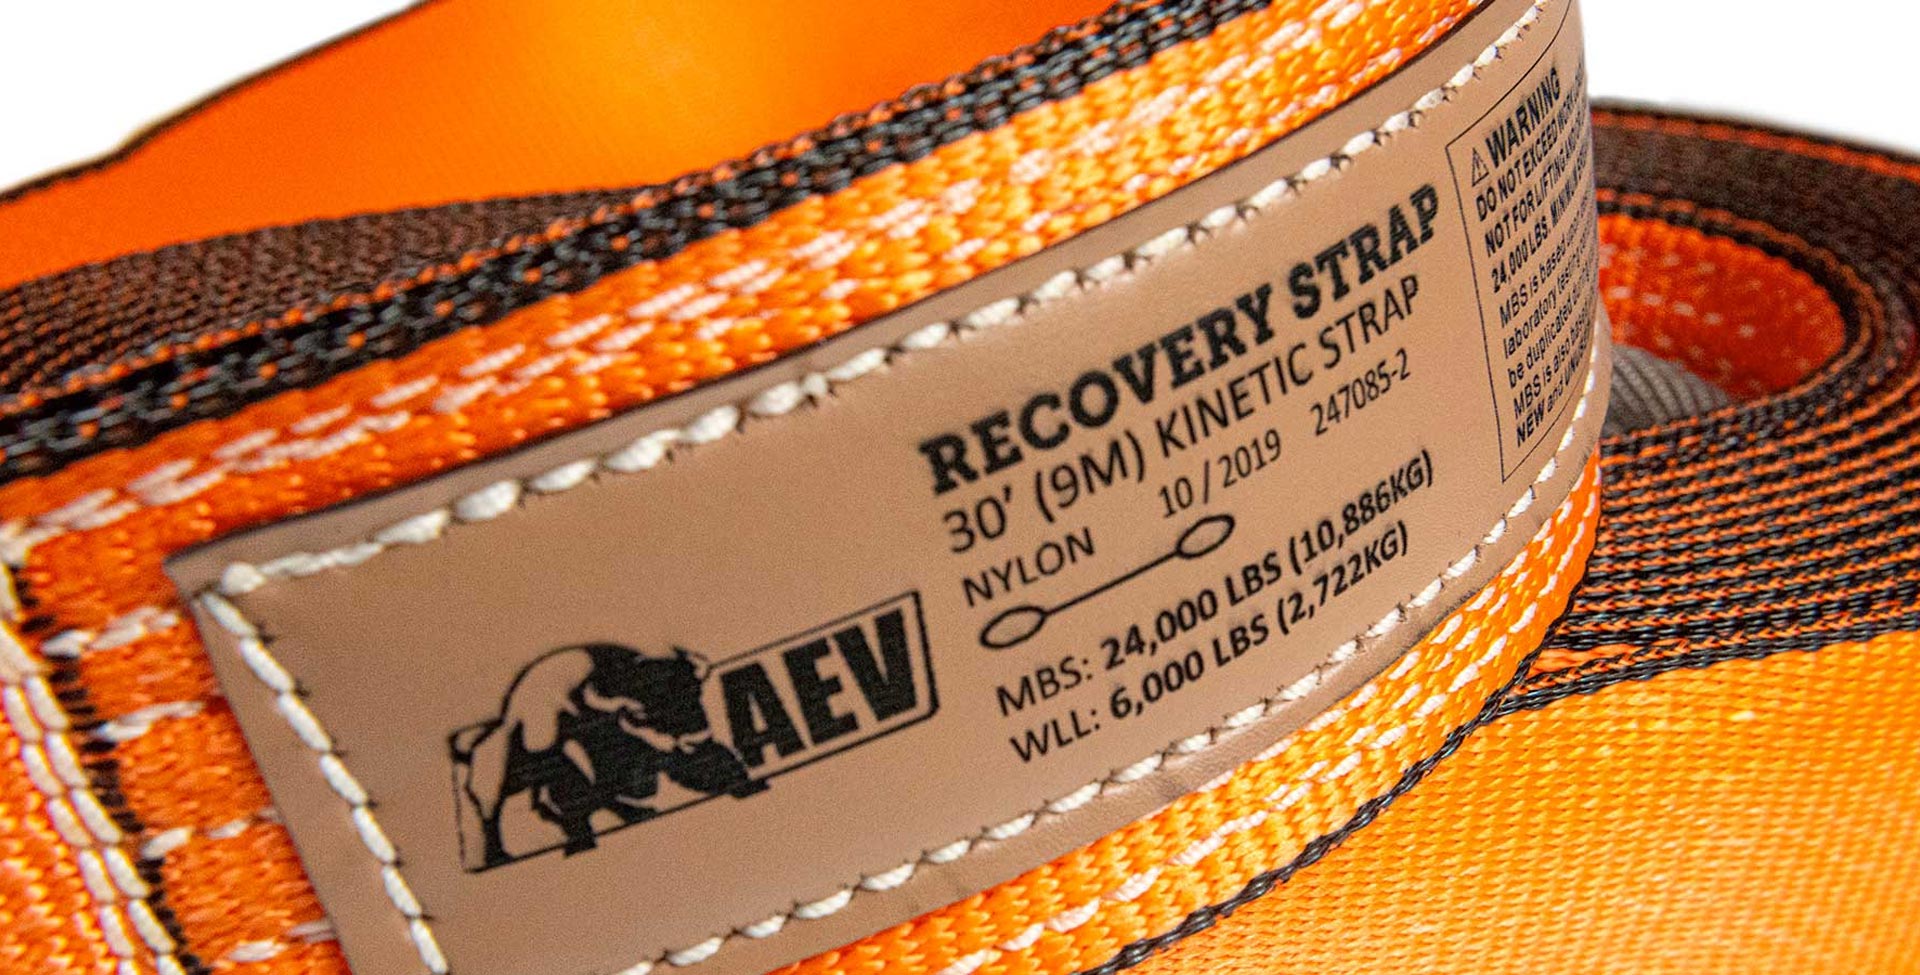 AEV Kinetic Recovery Strap